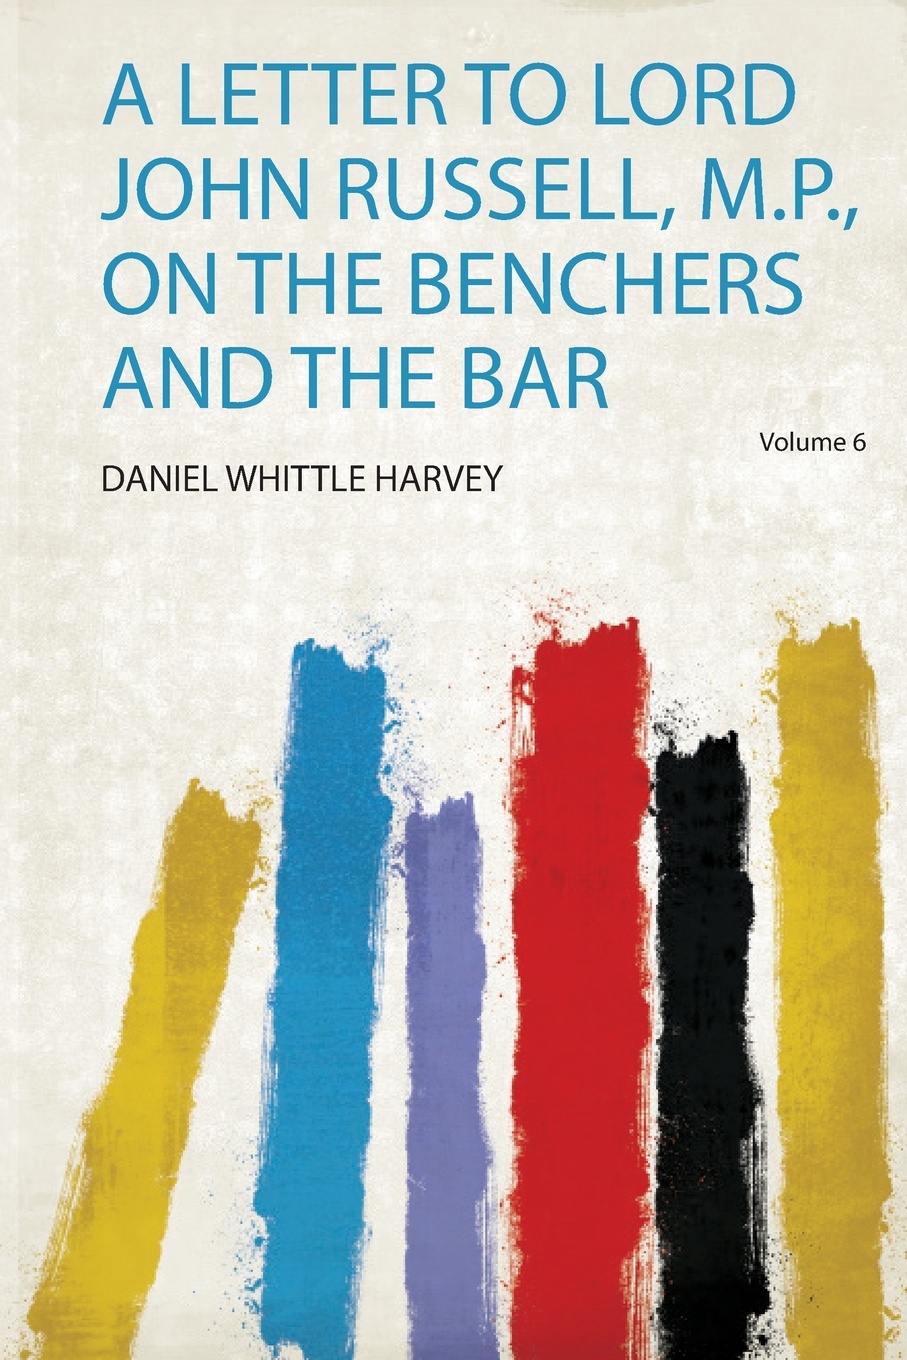 A Letter to Lord John Russell, M.P., on the Benchers and the Bar